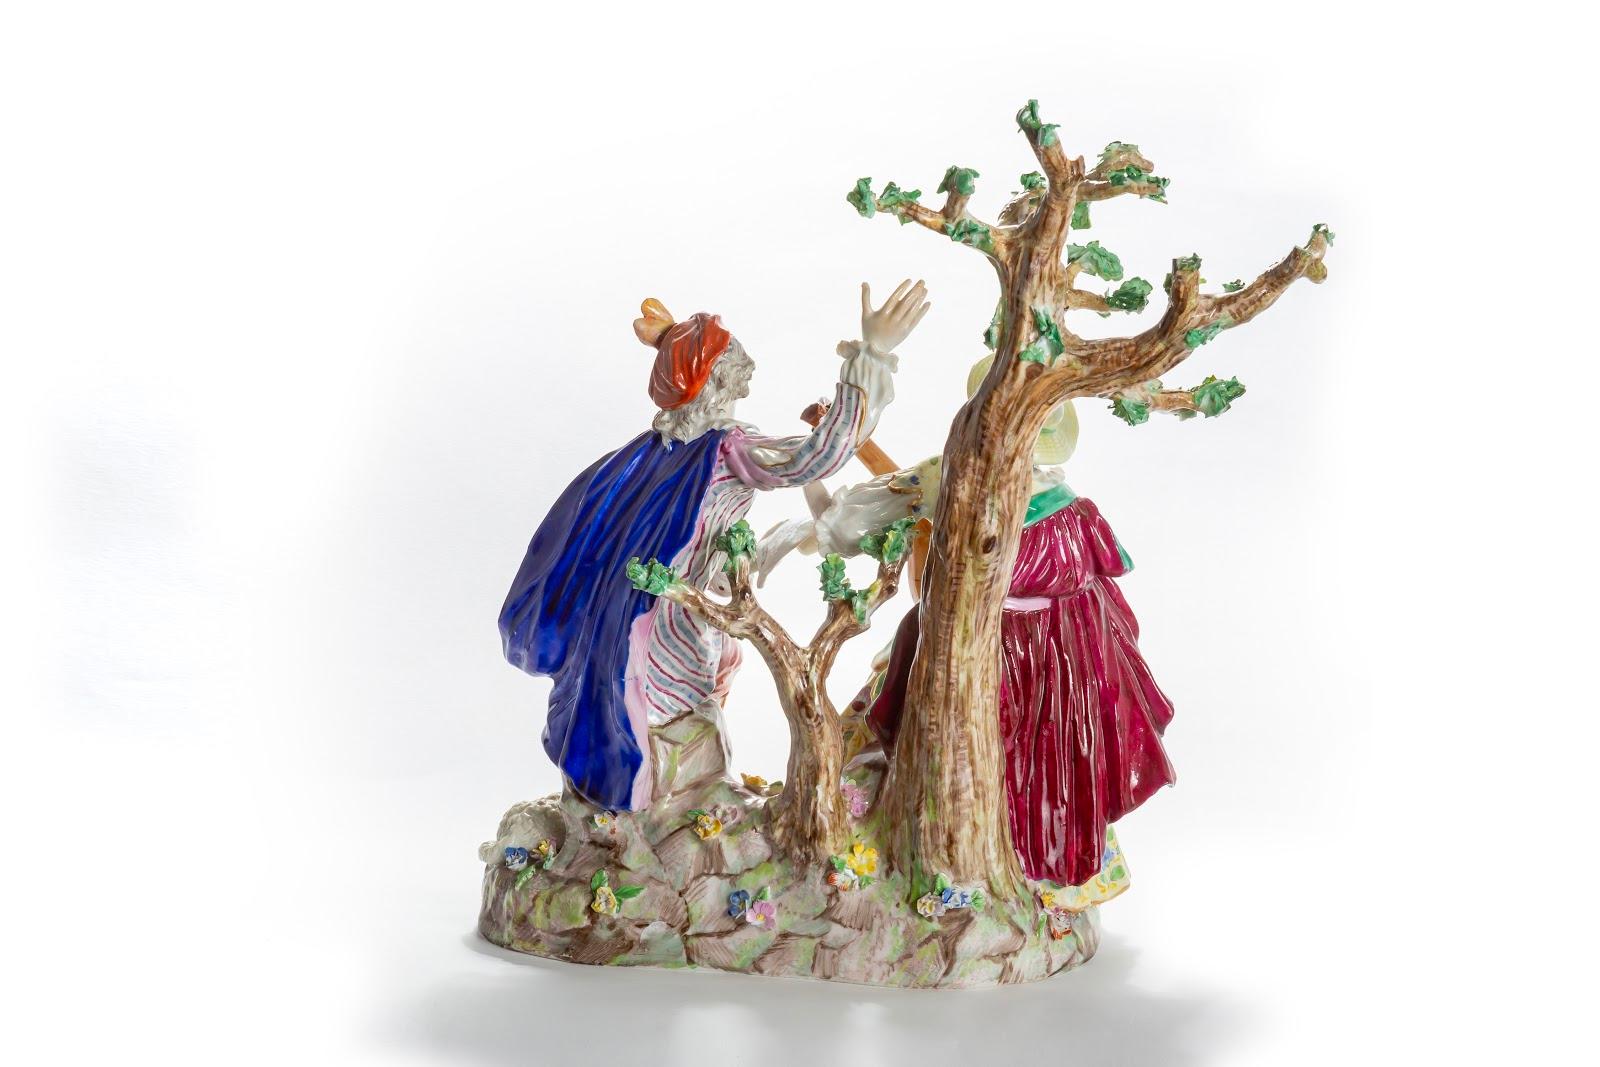 Unknown Figurative Sculpture - Porcelain Man & Woman Playing Music Under Tree, Germany